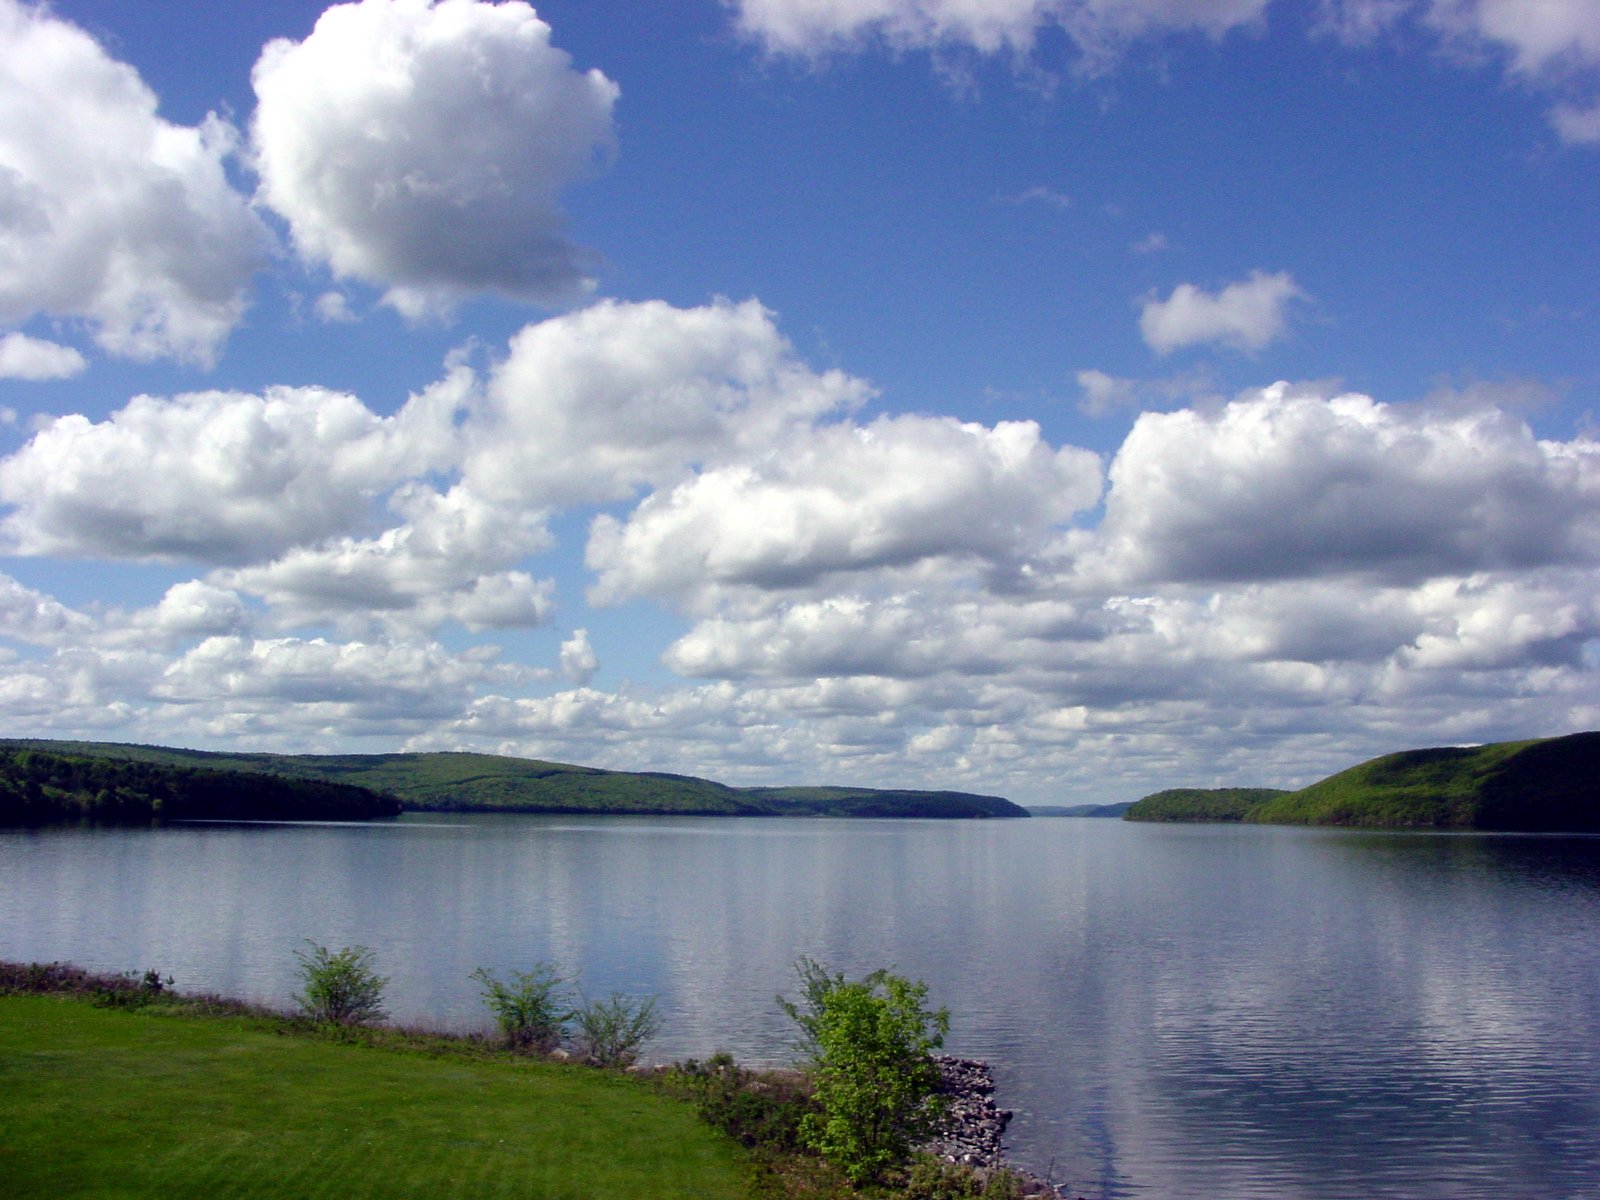 the large body of water has small hills and grass on both sides